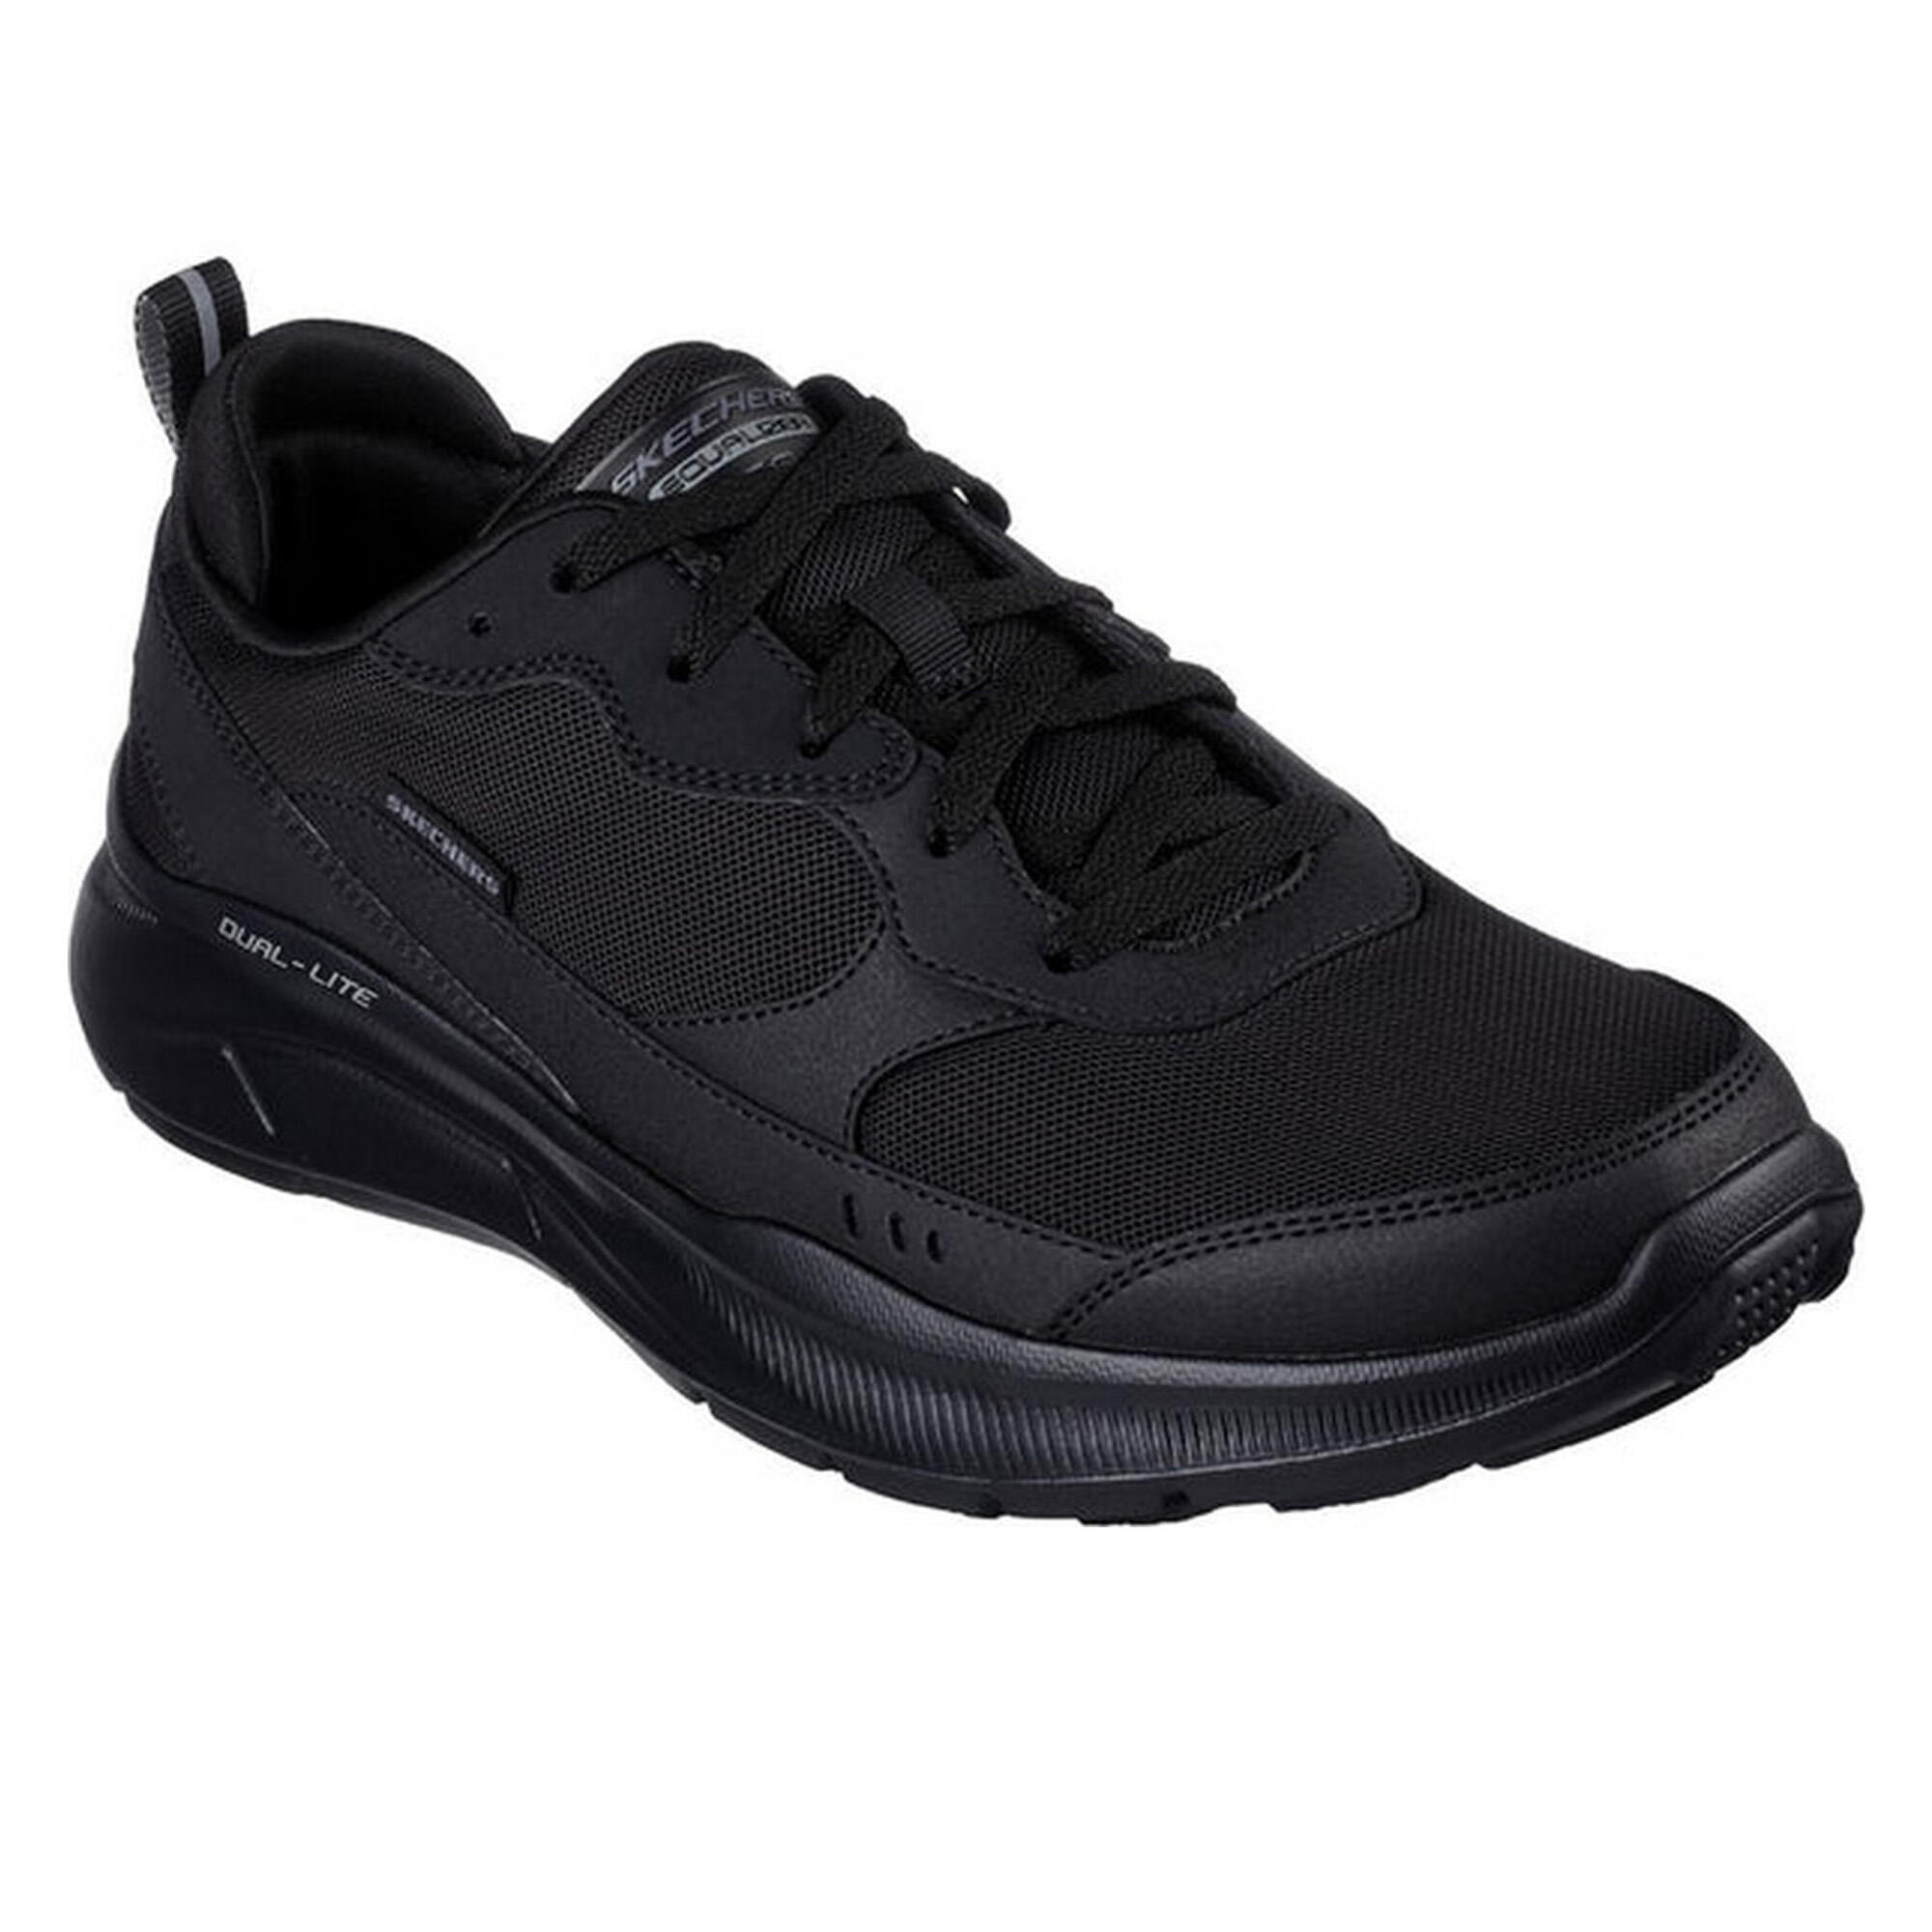 SKECHERS Mens Equalizer 5.0 Cyner Leather Trainers (Black)